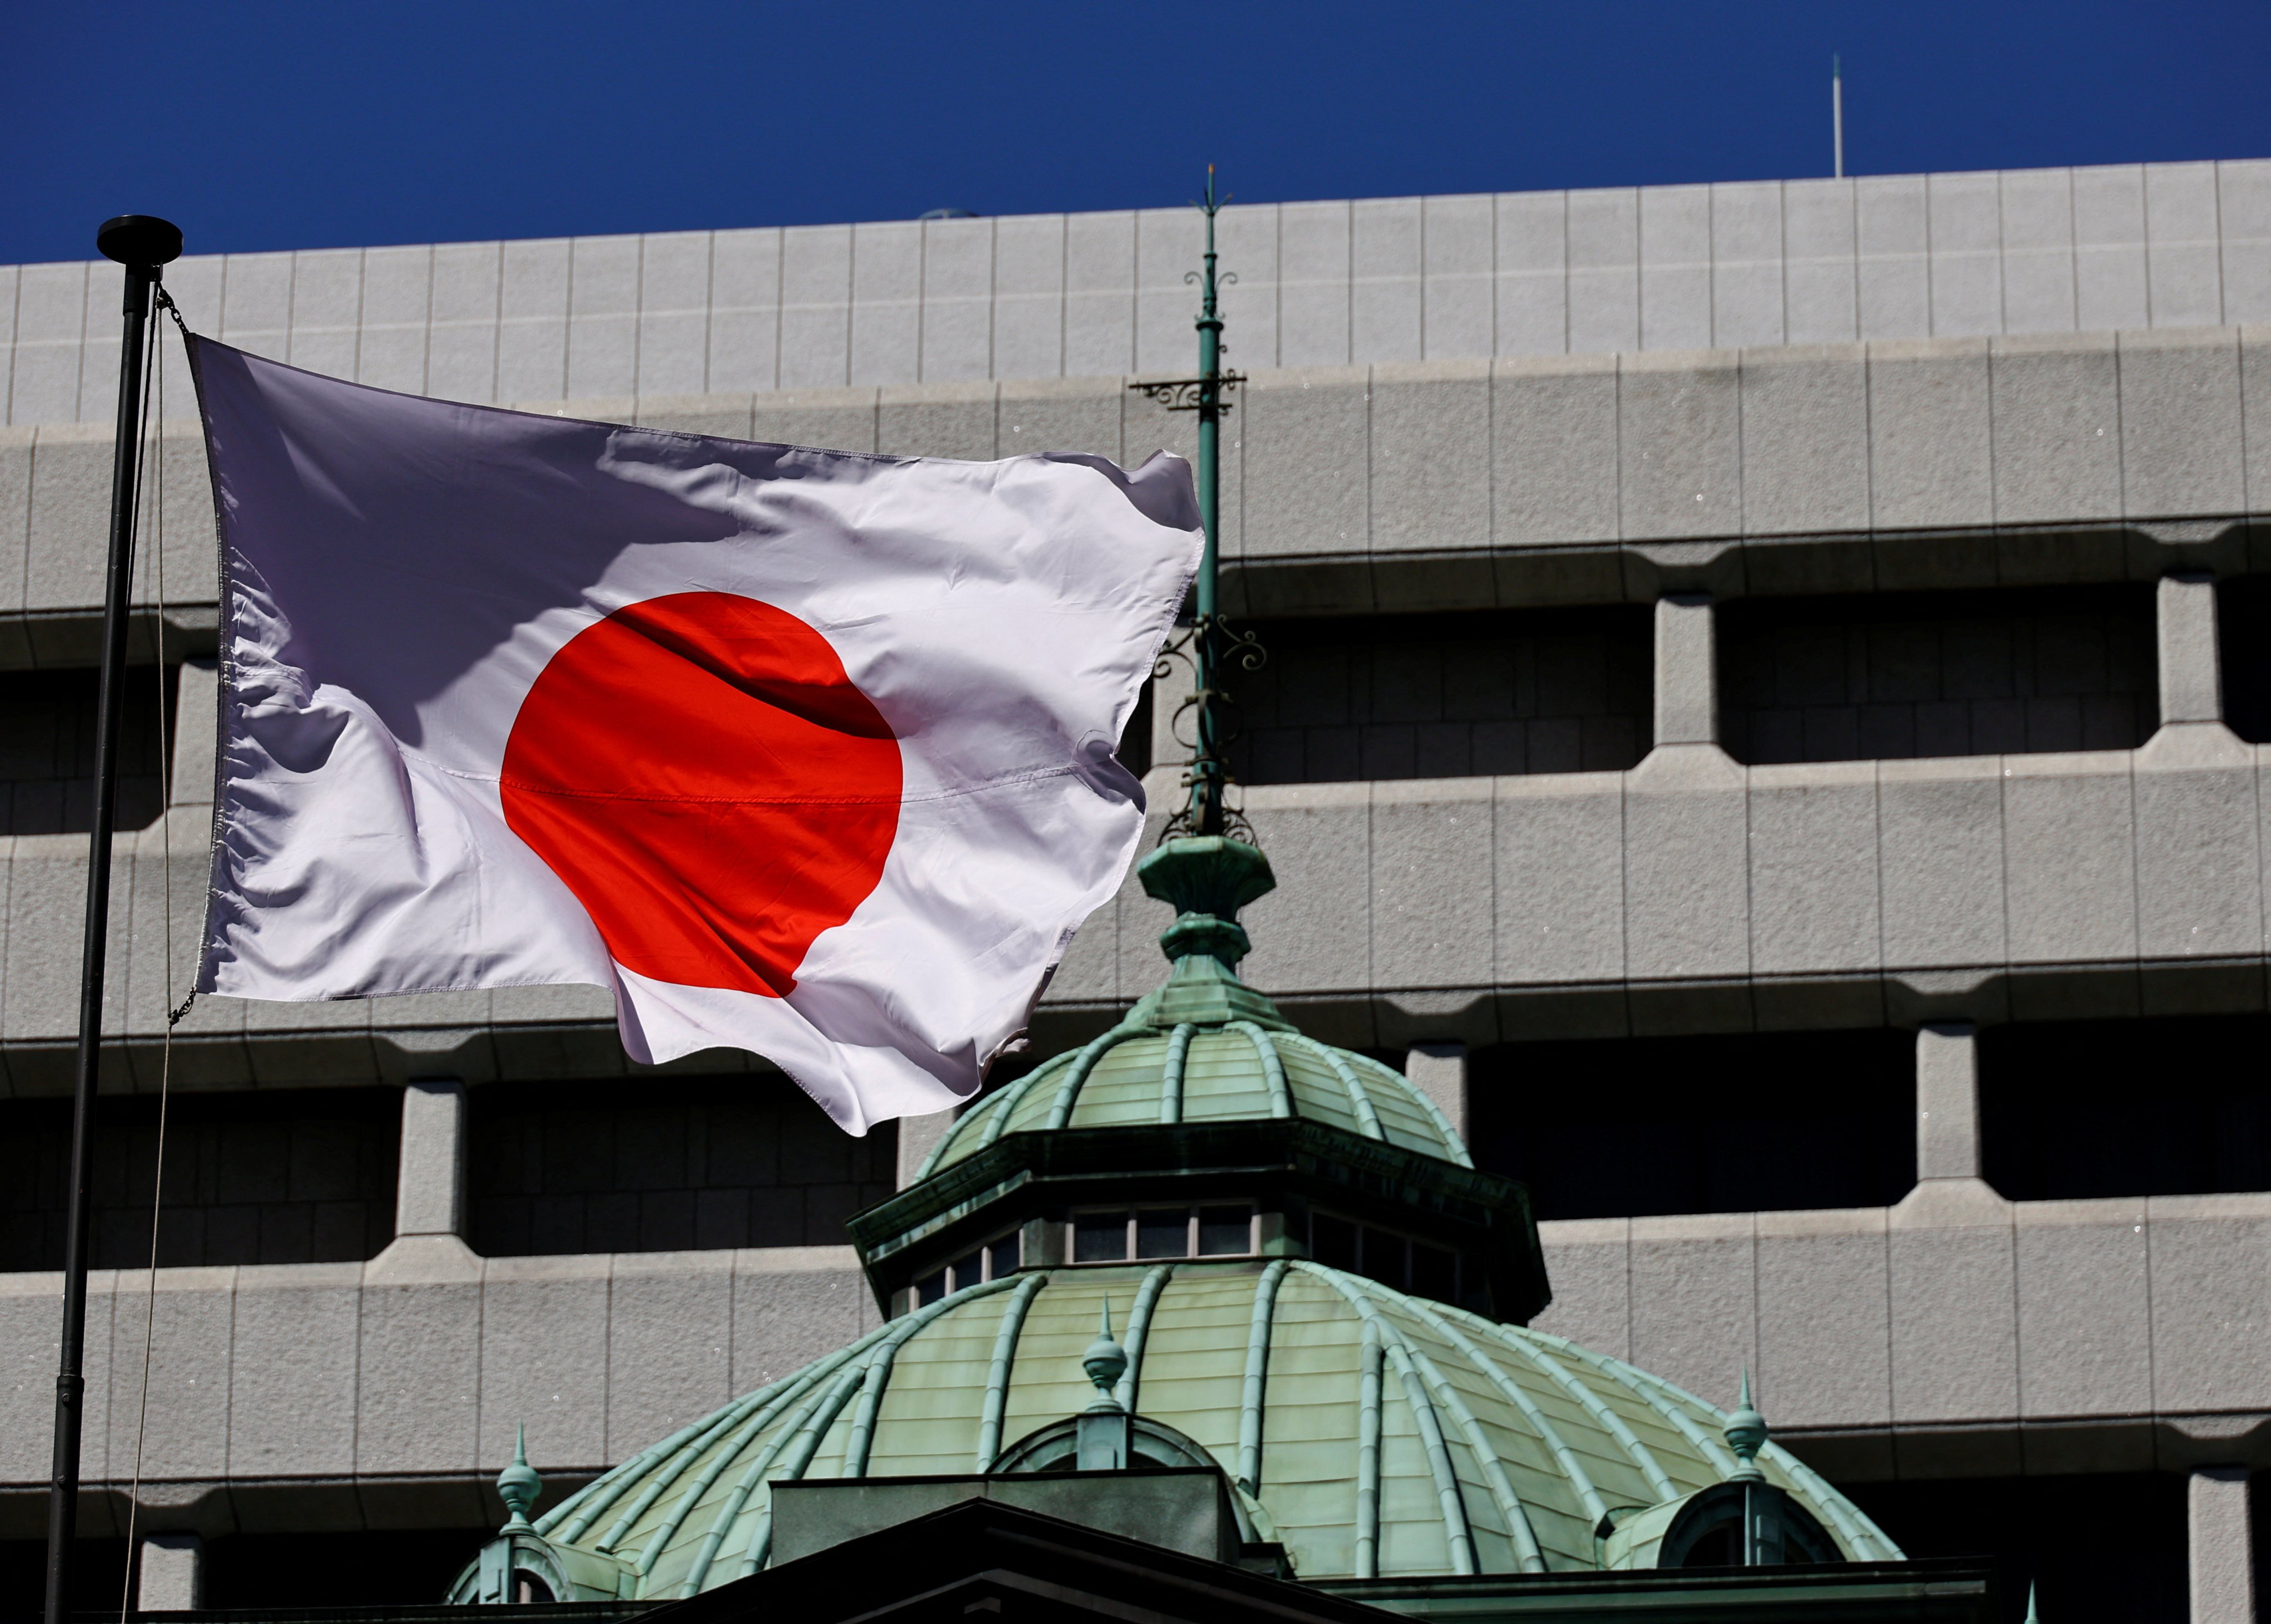 Japan’s national flag waves in the wind outside the Bank of Japan building in Tokyo. Japan’s debt-deflation lasted more than two decades, despite very low and even negative interest rates. Photo: Reuters